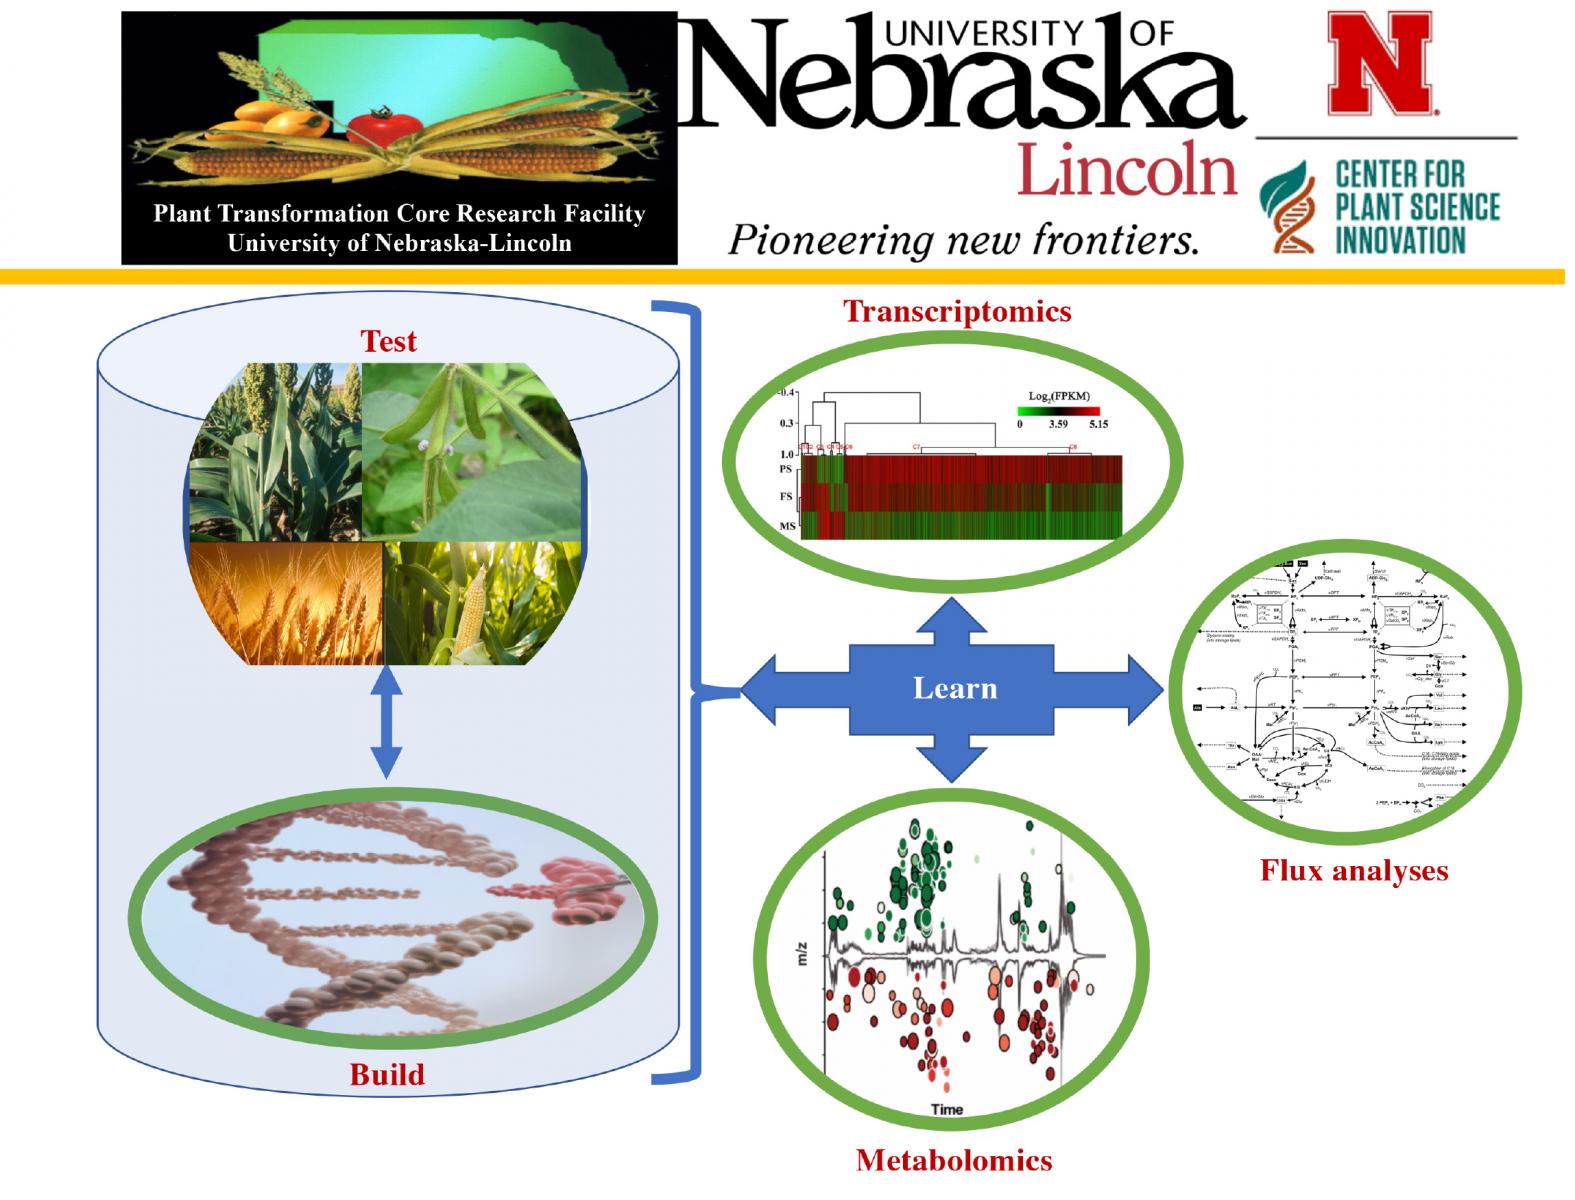 Graphic showing impact of plant transformation on transcriptomics, flux analyses, and metabolomics